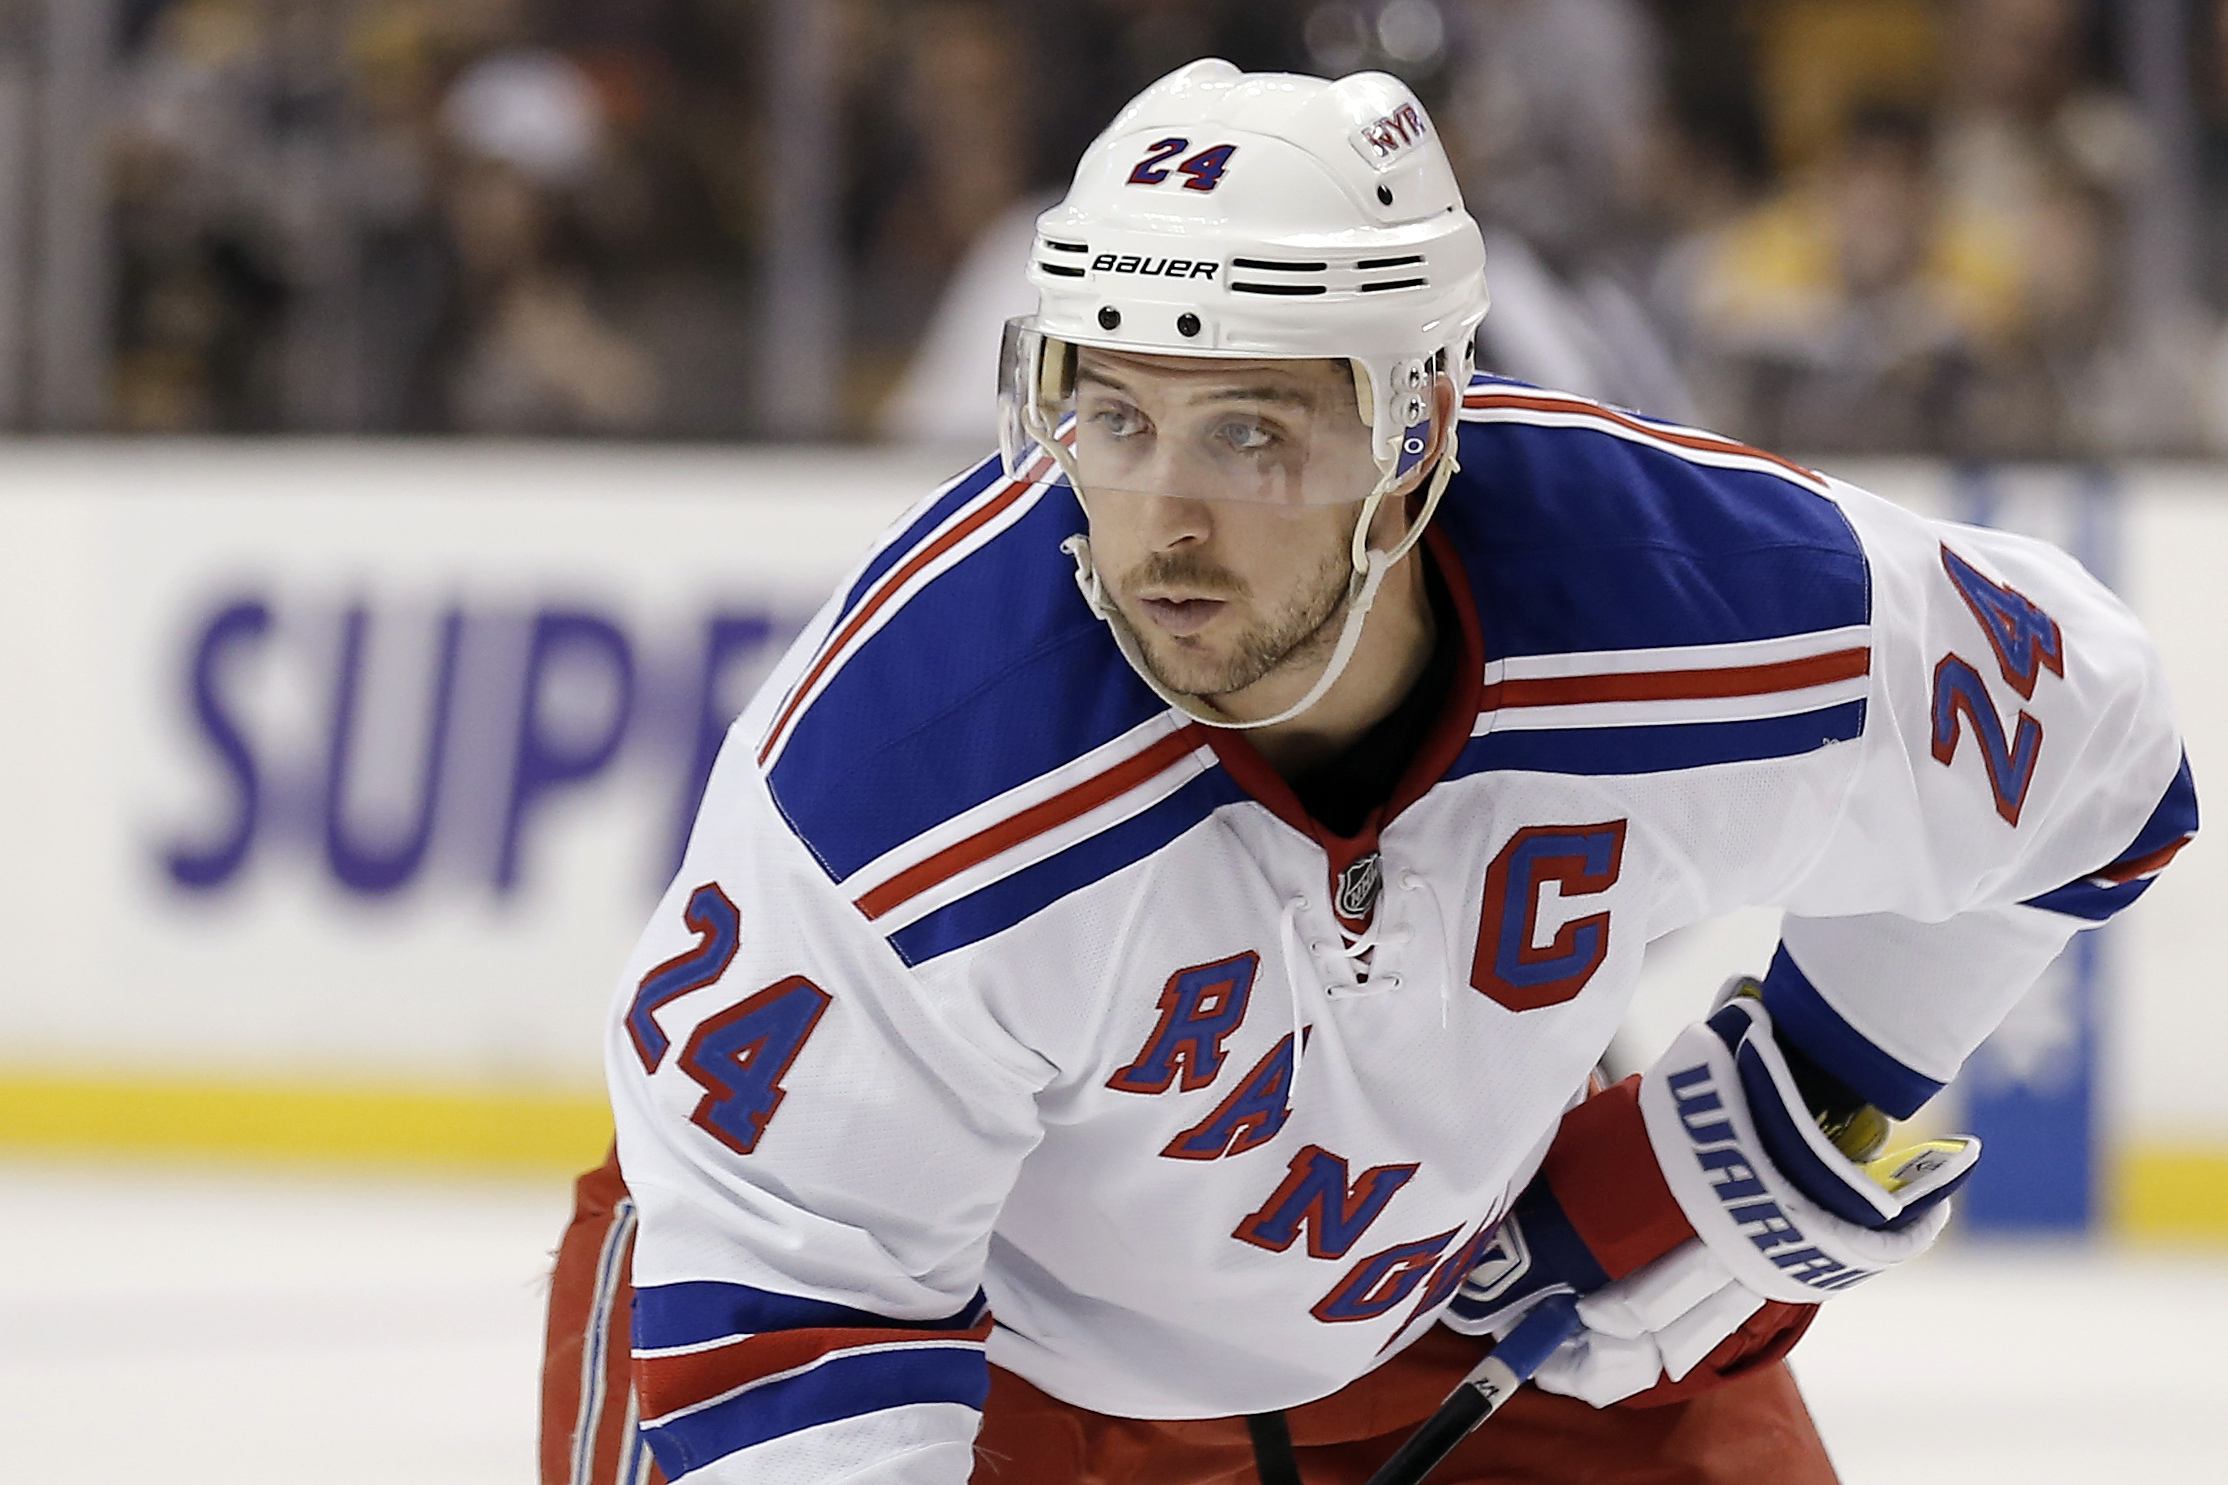 NY Rangers captain Ryan Callahan answers trade rumors on ice with first two  goals in rout of Avalanche – New York Daily News